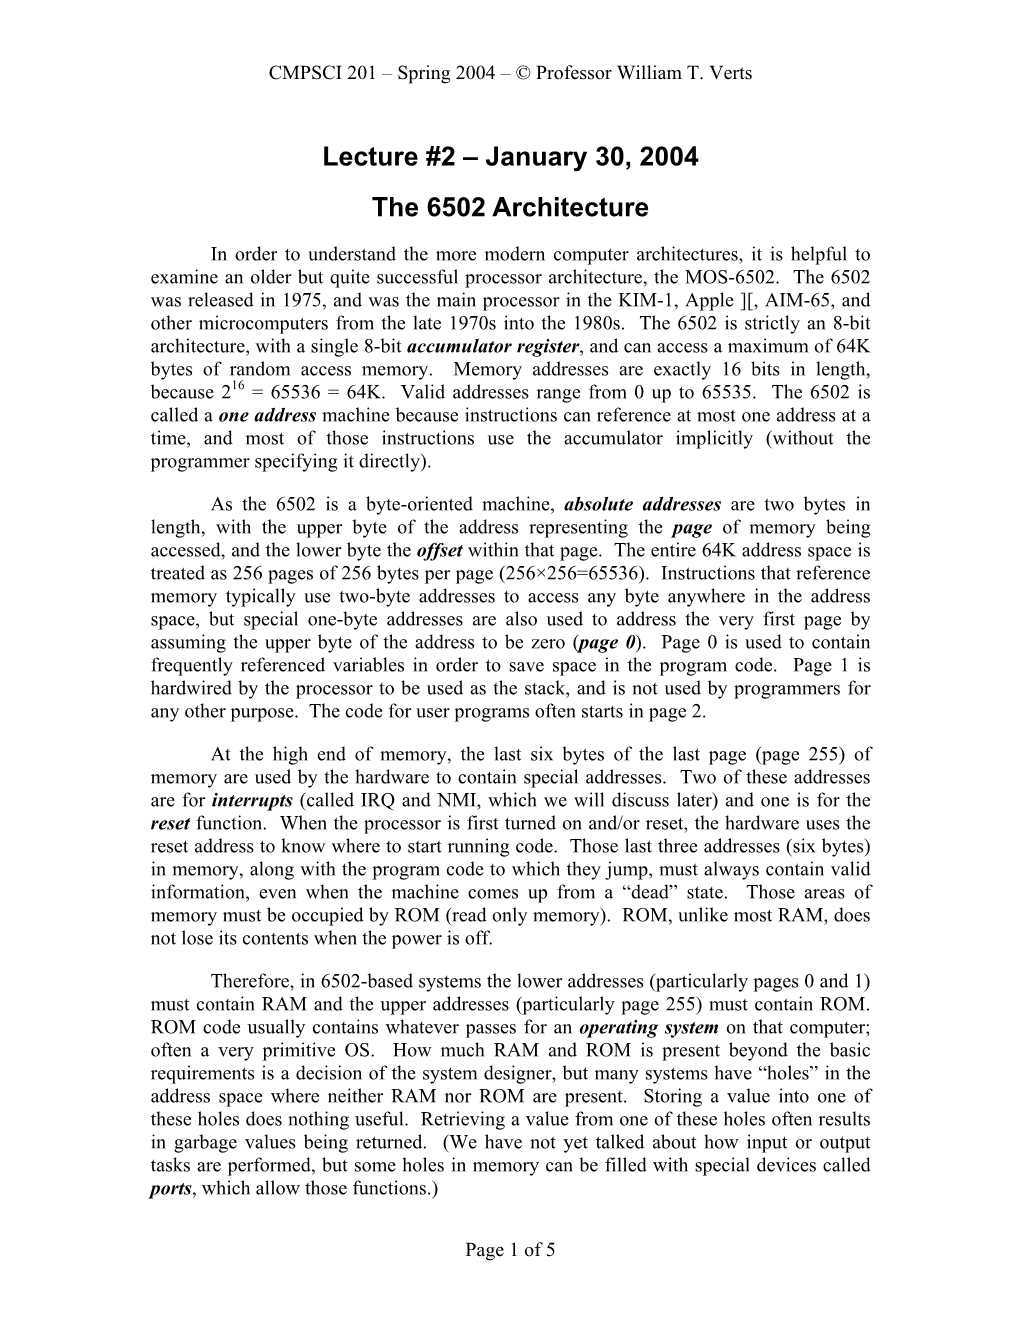 Lecture #2 – January 30, 2004 the 6502 Architecture